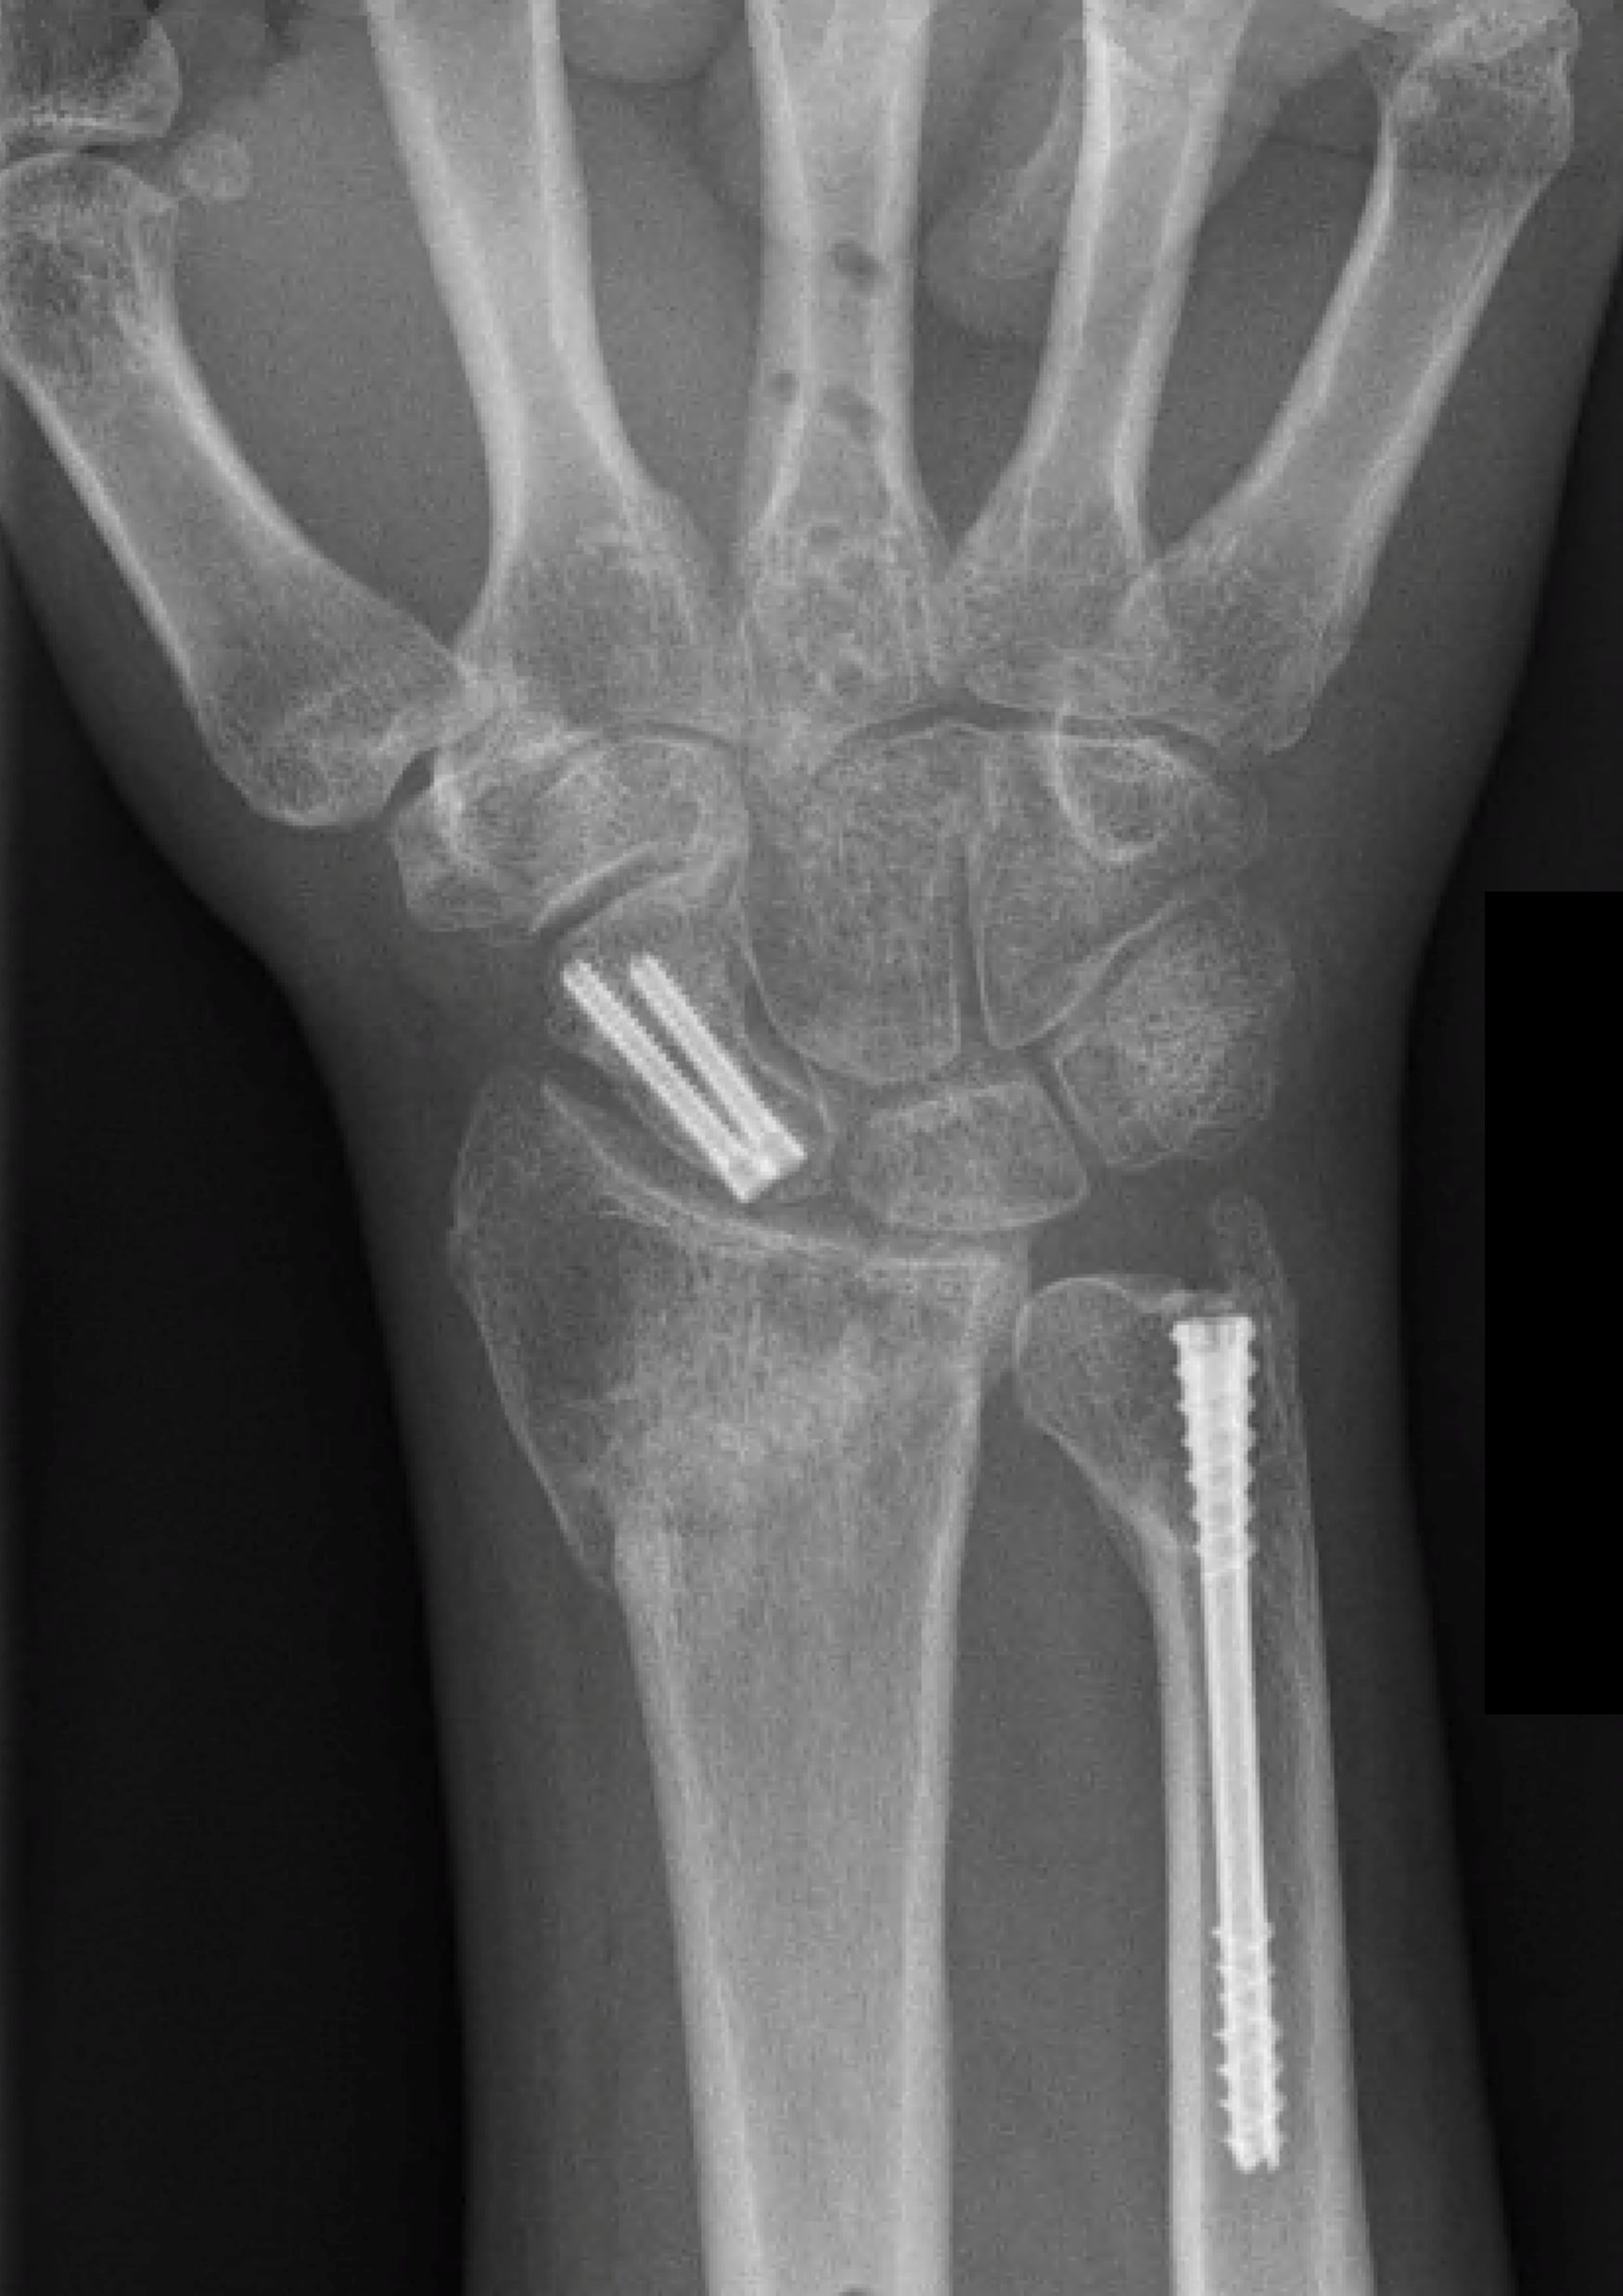 Multiple Elastic Retrograde Intramedullary Nailing for Adult Humeral  Diaphyseal Fractures